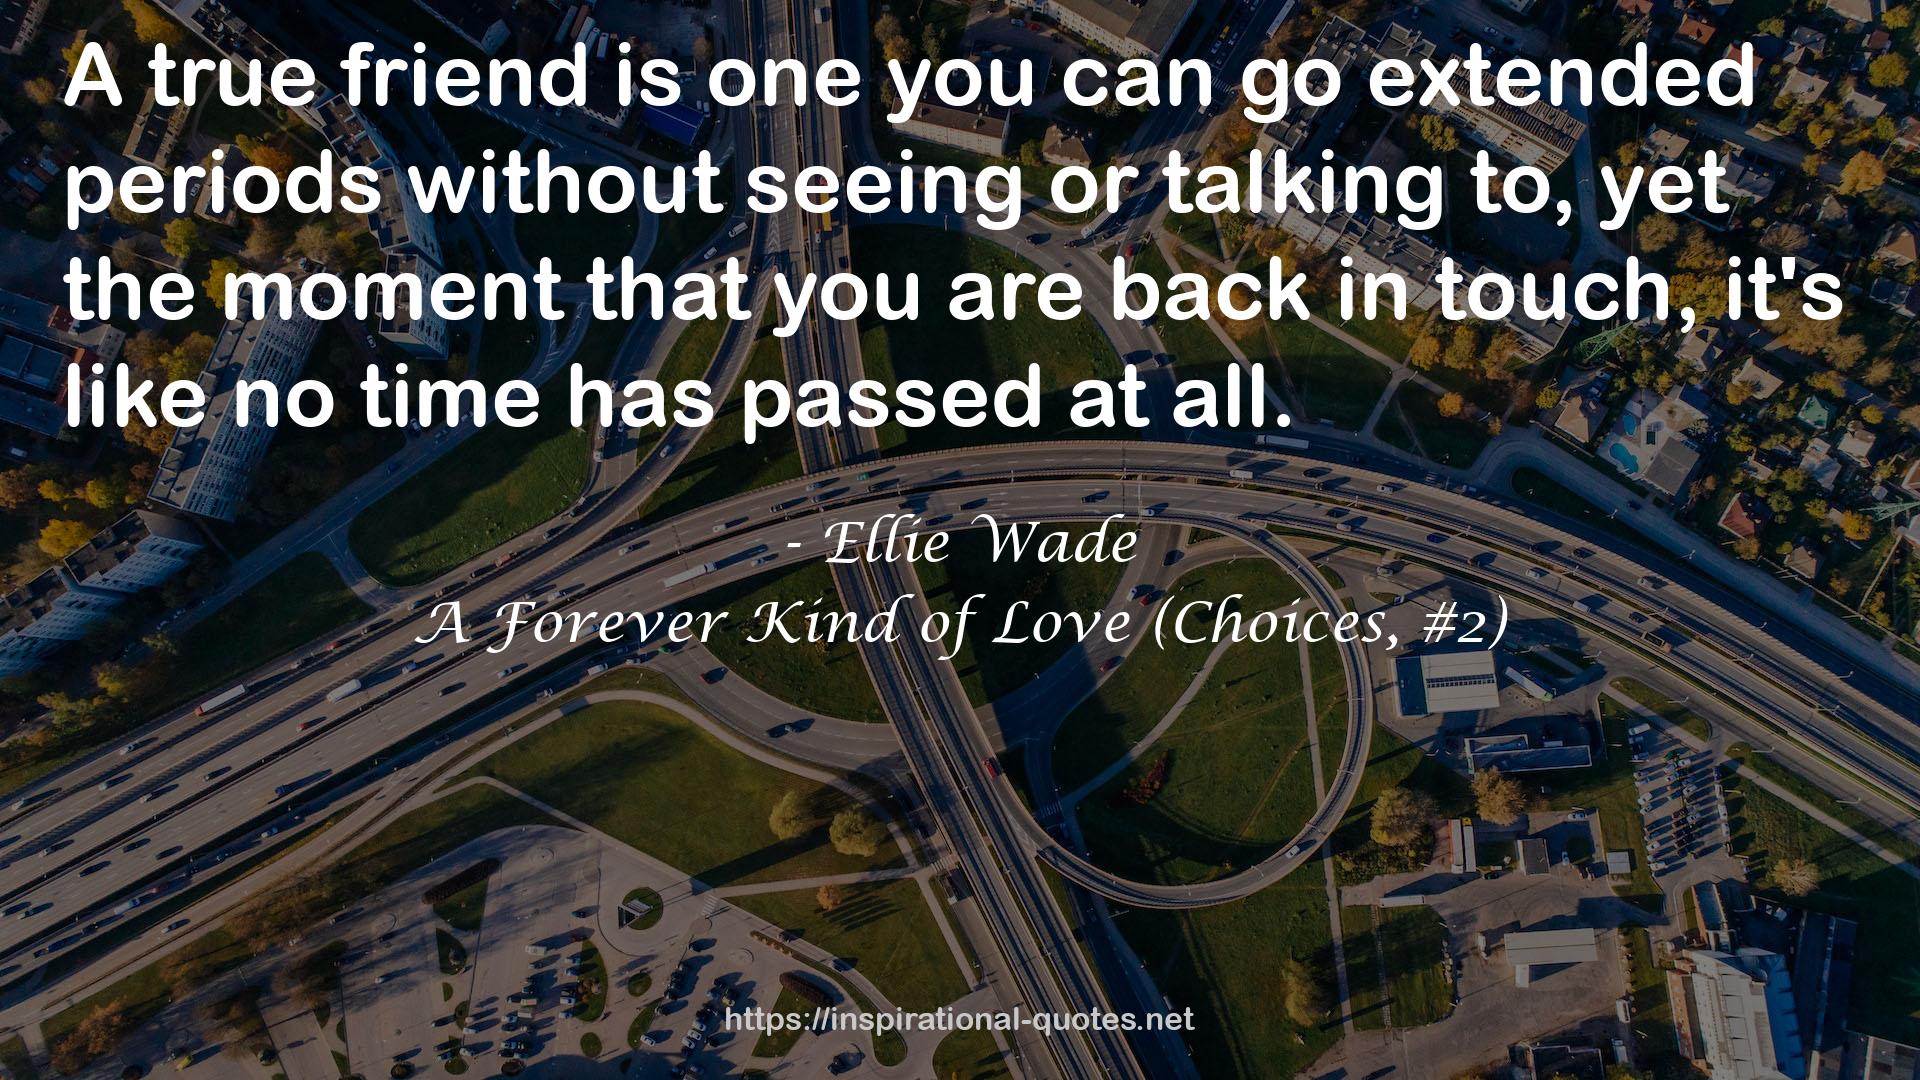 Ellie Wade QUOTES